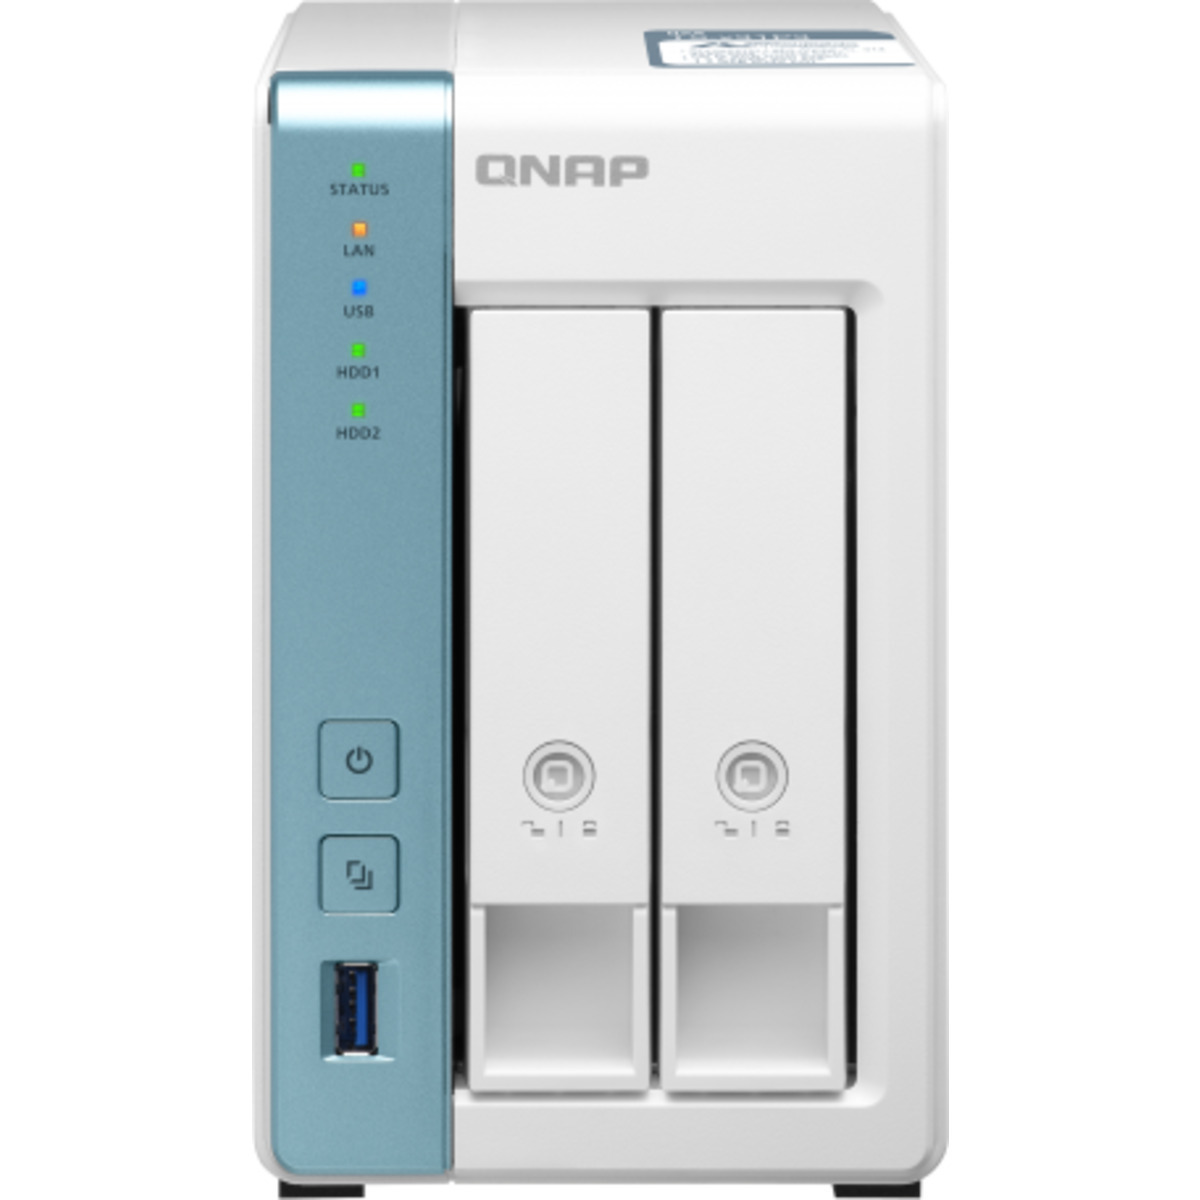 buy $885 QNAP TS-231P3 16tb Desktop NAS - Network Attached Storage Device 2x8000gb Western Digital Ultrastar DC HC320 HUS728T8TALE6L4 3.5 7200rpm SATA 6Gb/s HDD ENTERPRISE Class Drives Installed - Burn-In Tested - FREE RAM UPGRADE - nas headquarters buy network attached storage server device das new raid-5 free shipping usa christmas new year holiday sale TS-231P3